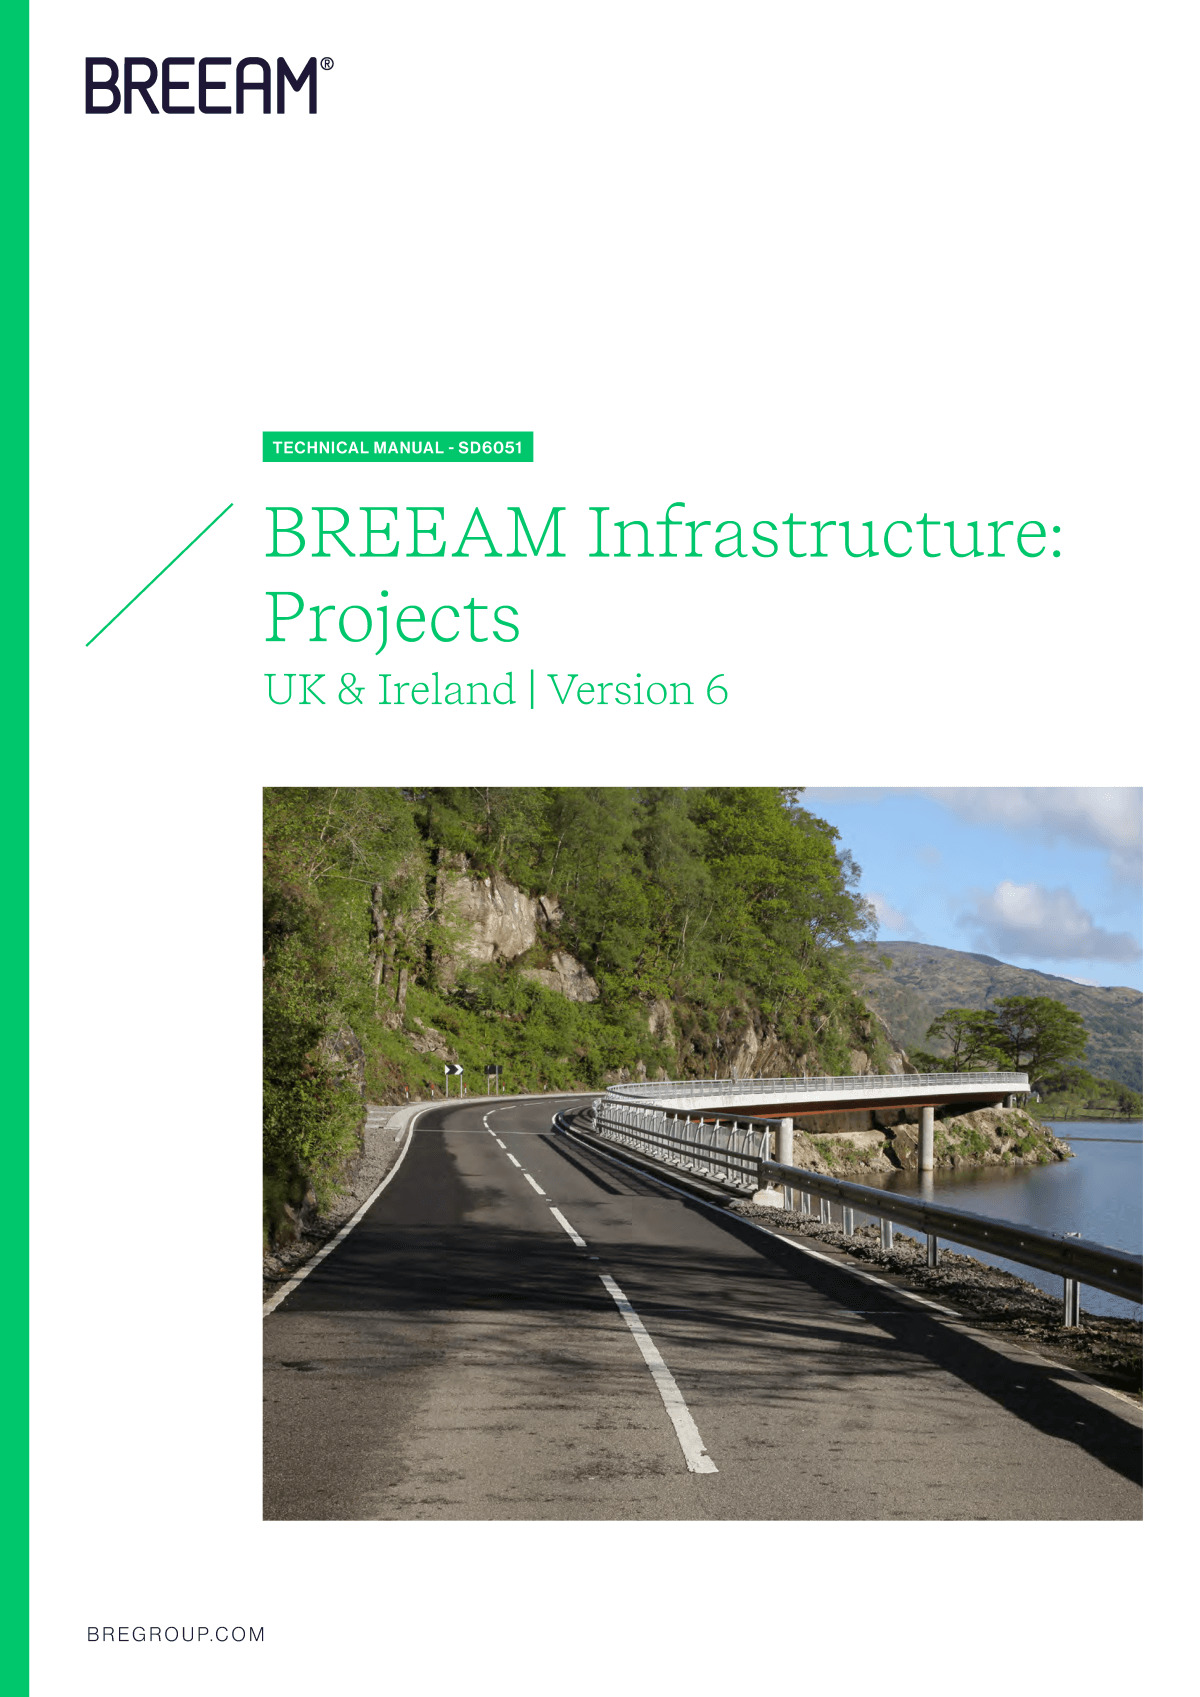 cover-breeam-infrastructure-projects-uk-ireland